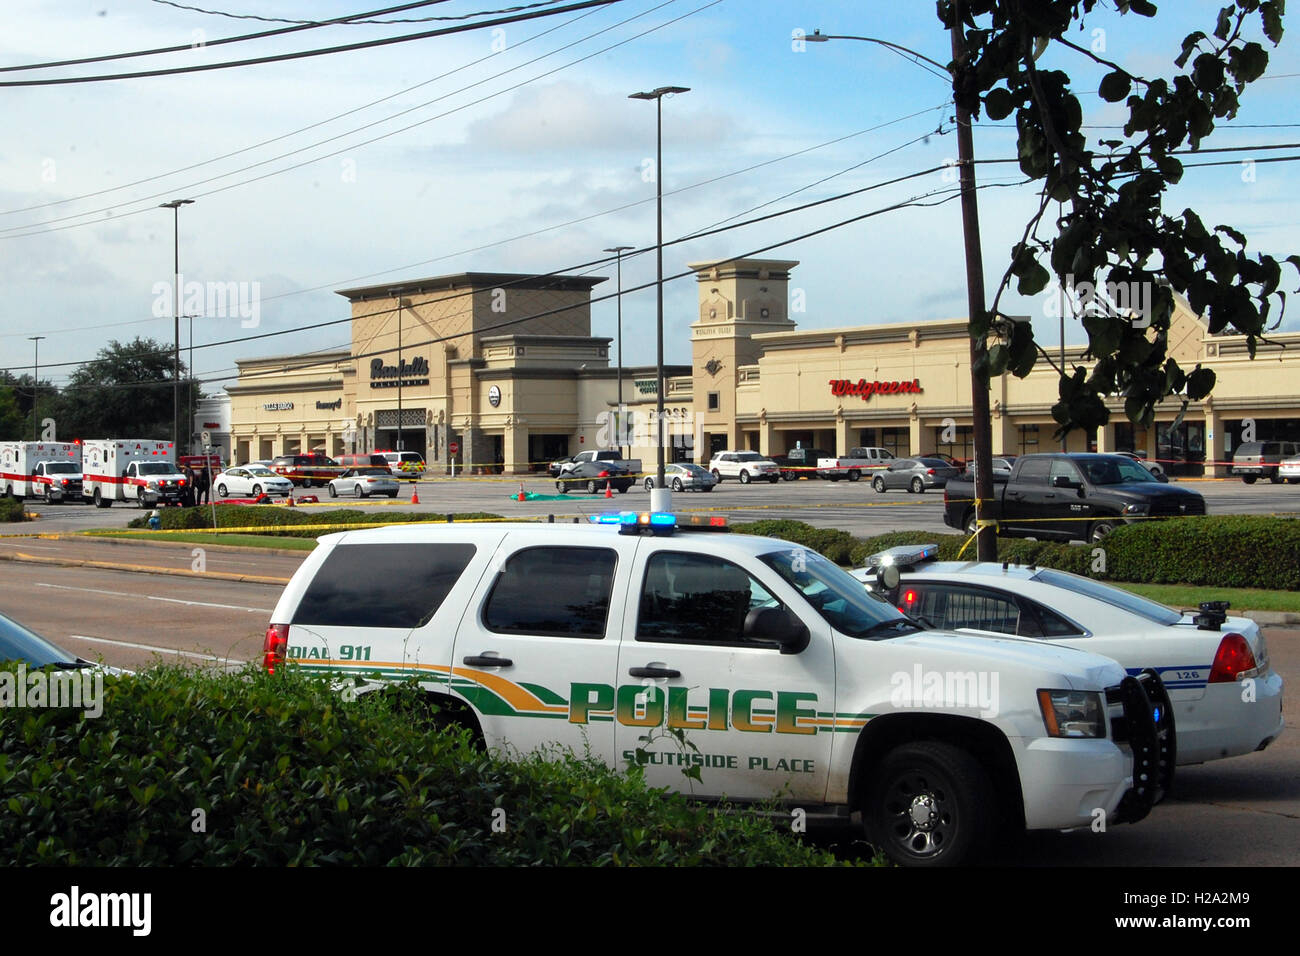 Houston, USA. 26th Sep, 2016. Police cars are seen near the site of a shootout in Houston, Texas, the United States, Sept. 26, 2016. Nine people were injured early Monday when a man armed with several weapons opened fire on vehicles in southwest Houston, the largest city in the U.S. state of Texas. Credit:  Jia Zhong/Xinhua/Alamy Live News Stock Photo